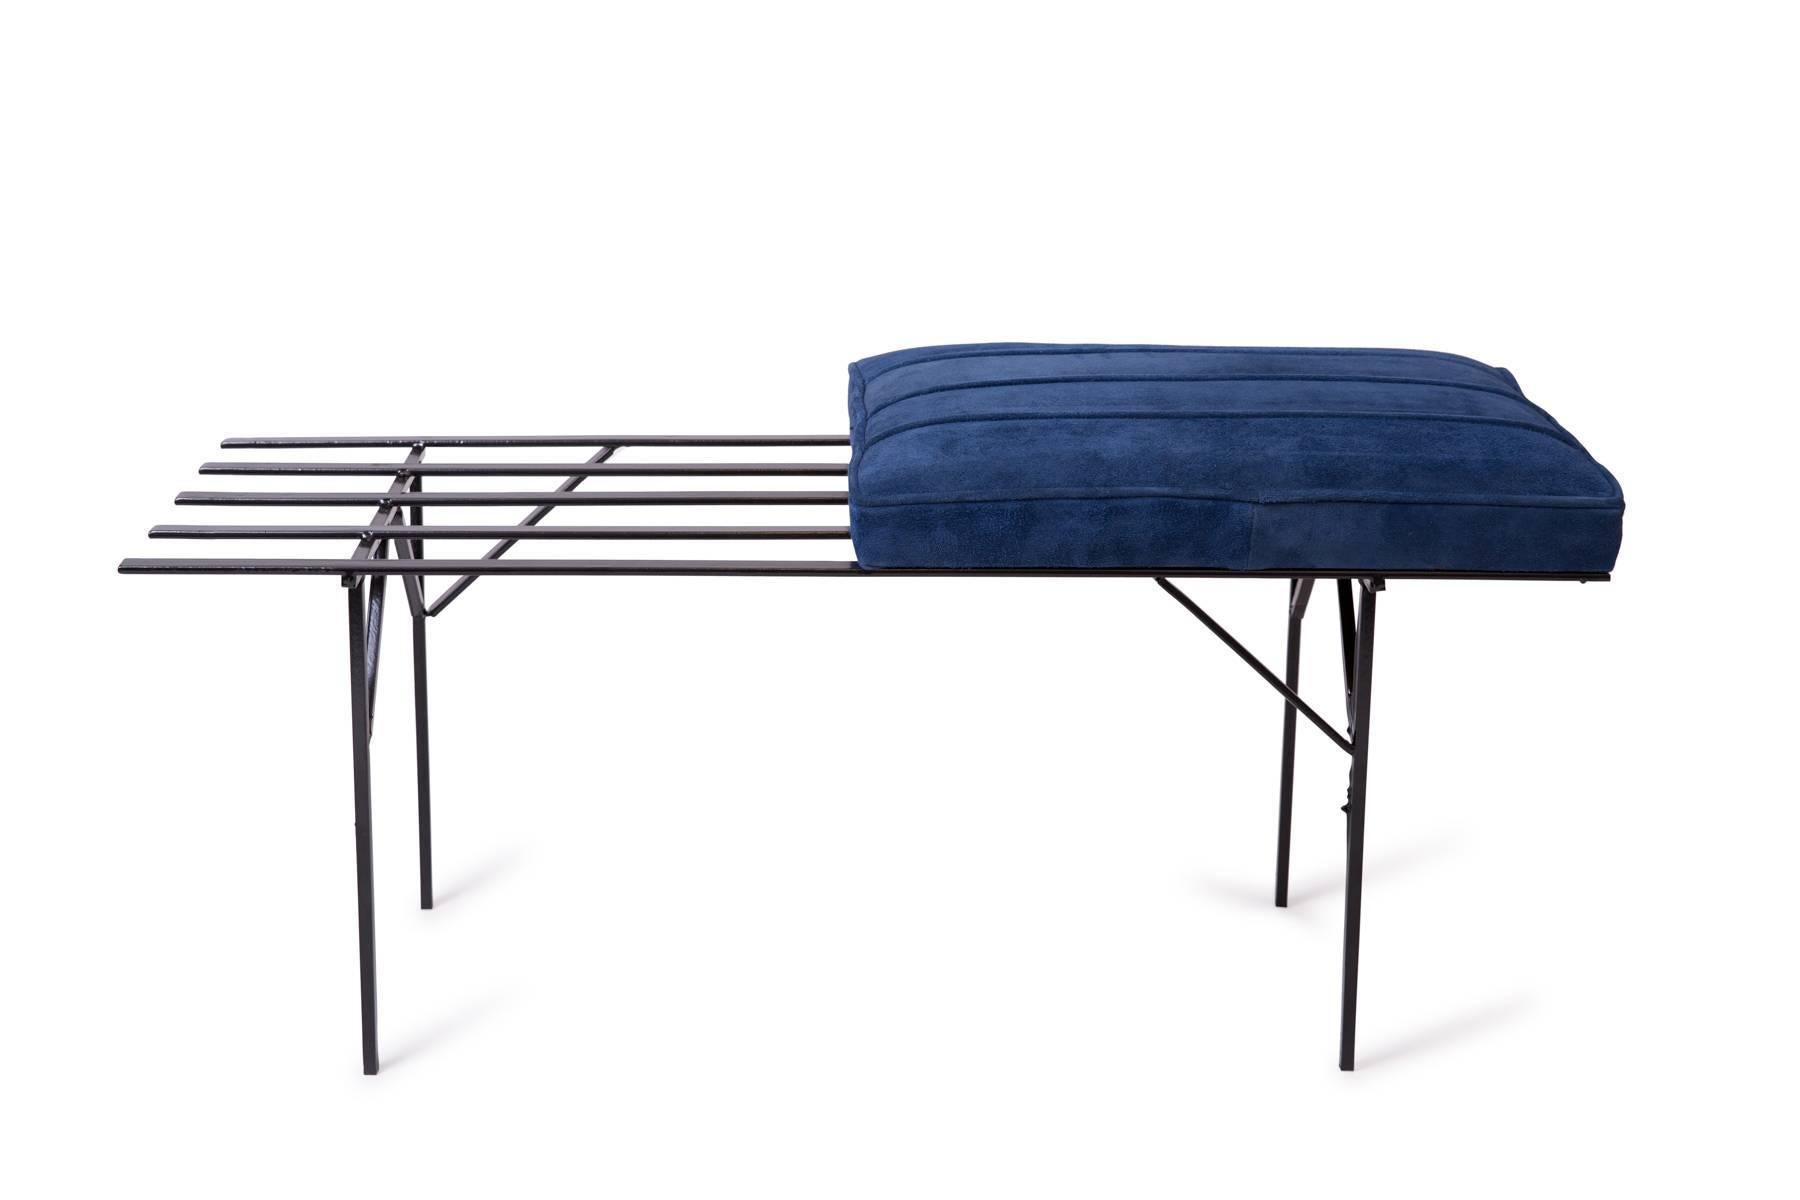 One iron and suede slat bench from France, circa mid-1950s. This example has a powder coated iron frame and has been newly upholstered in bright blue suede. 

Price listed is per bench. 
We have one single bench remaining.